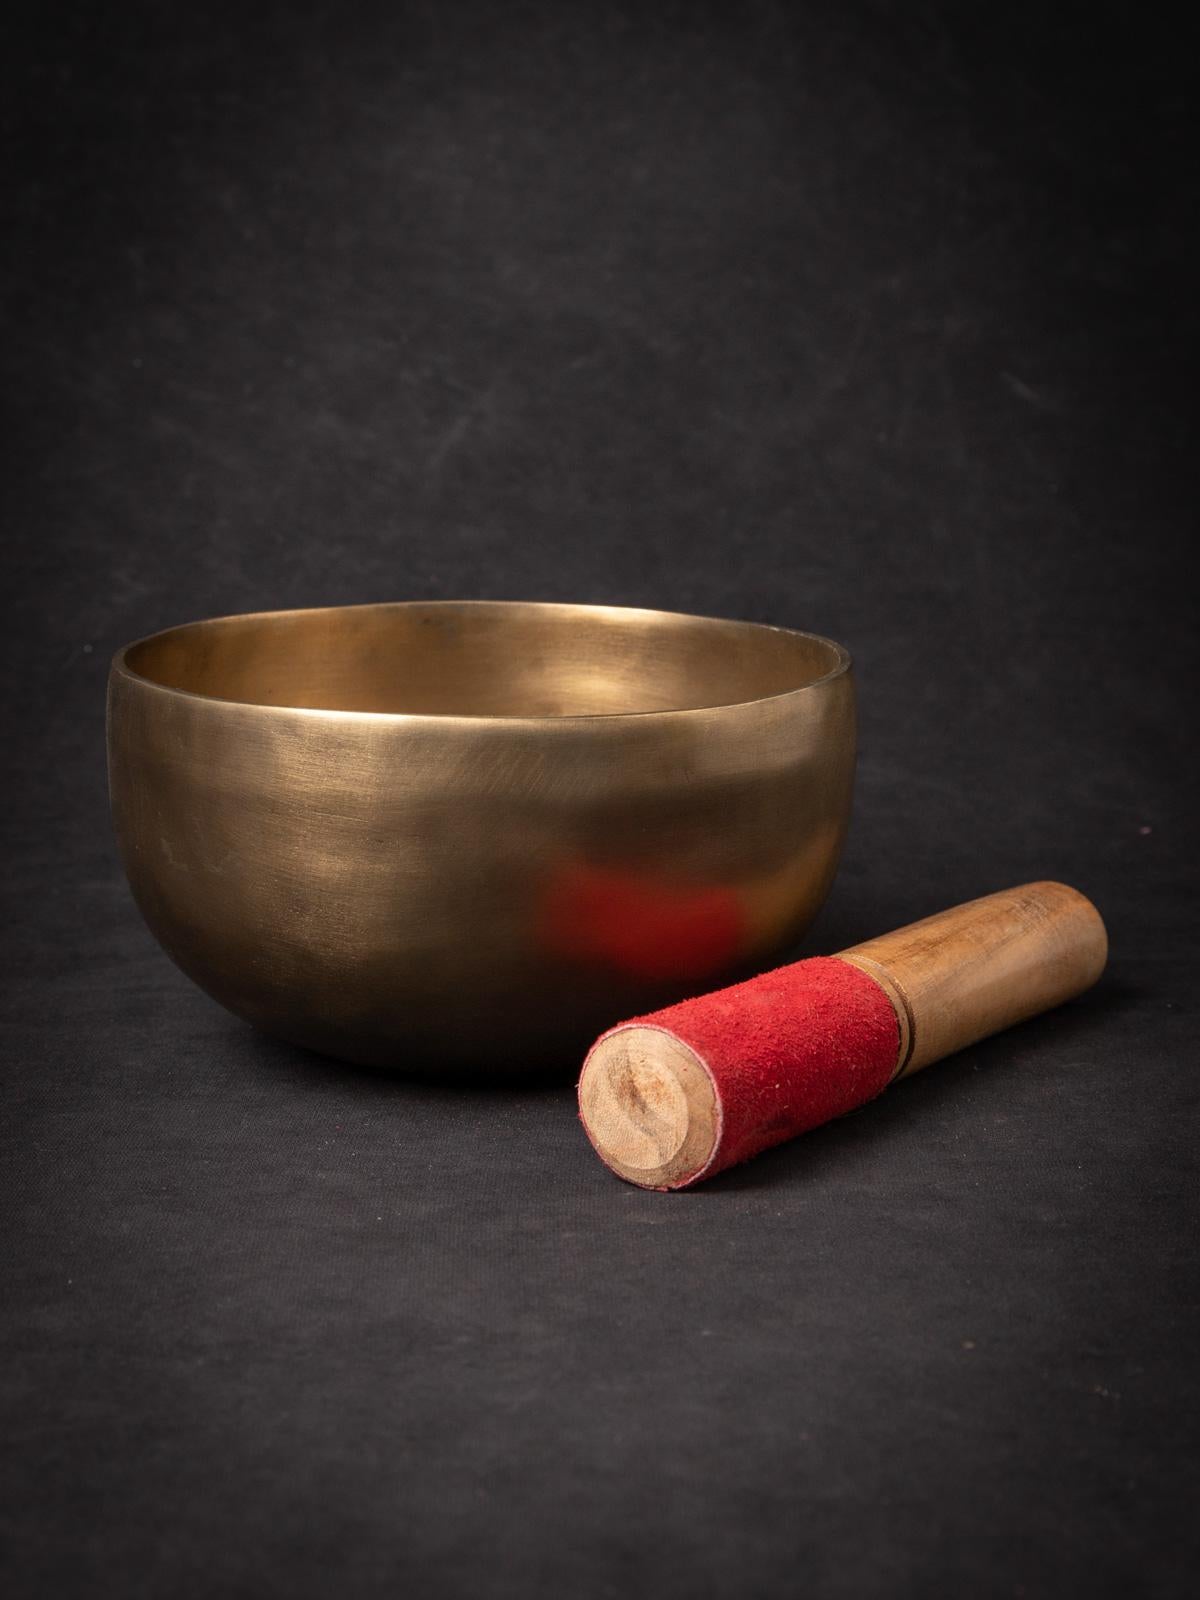 The newly made bronze Nepali Singing Bowl is a testament to the ongoing craftsmanship and traditions of Nepal. Crafted from bronze, this singing bowl stands at 9.1 cm in height and has a diameter of 16.4 cm. Its high-quality construction reflects